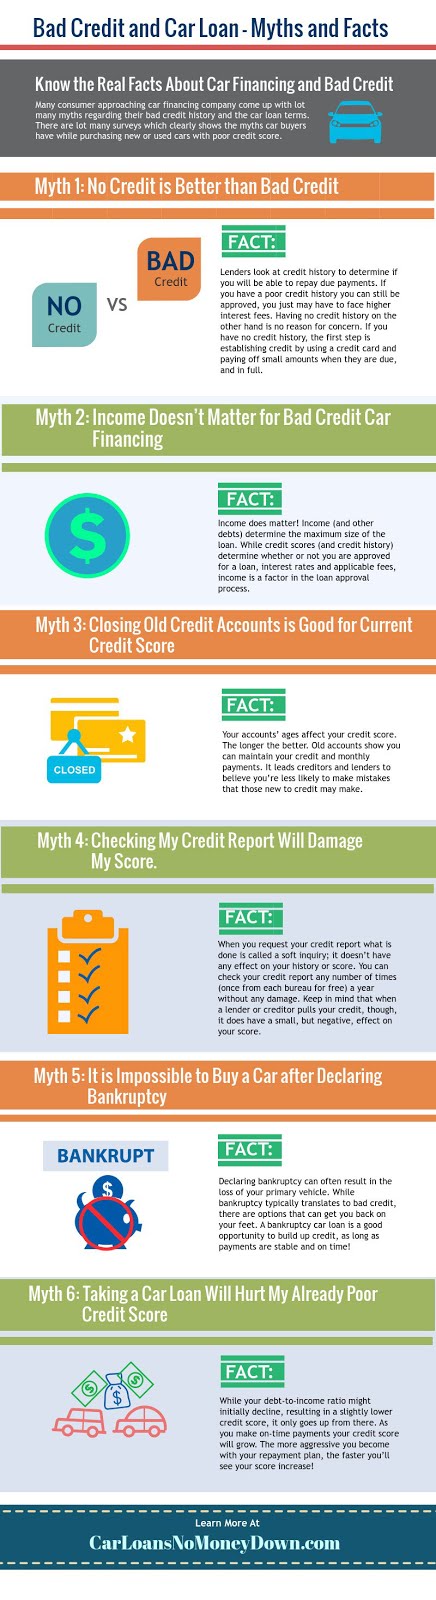 Myths & Facts About Bad Credit and Car Loans